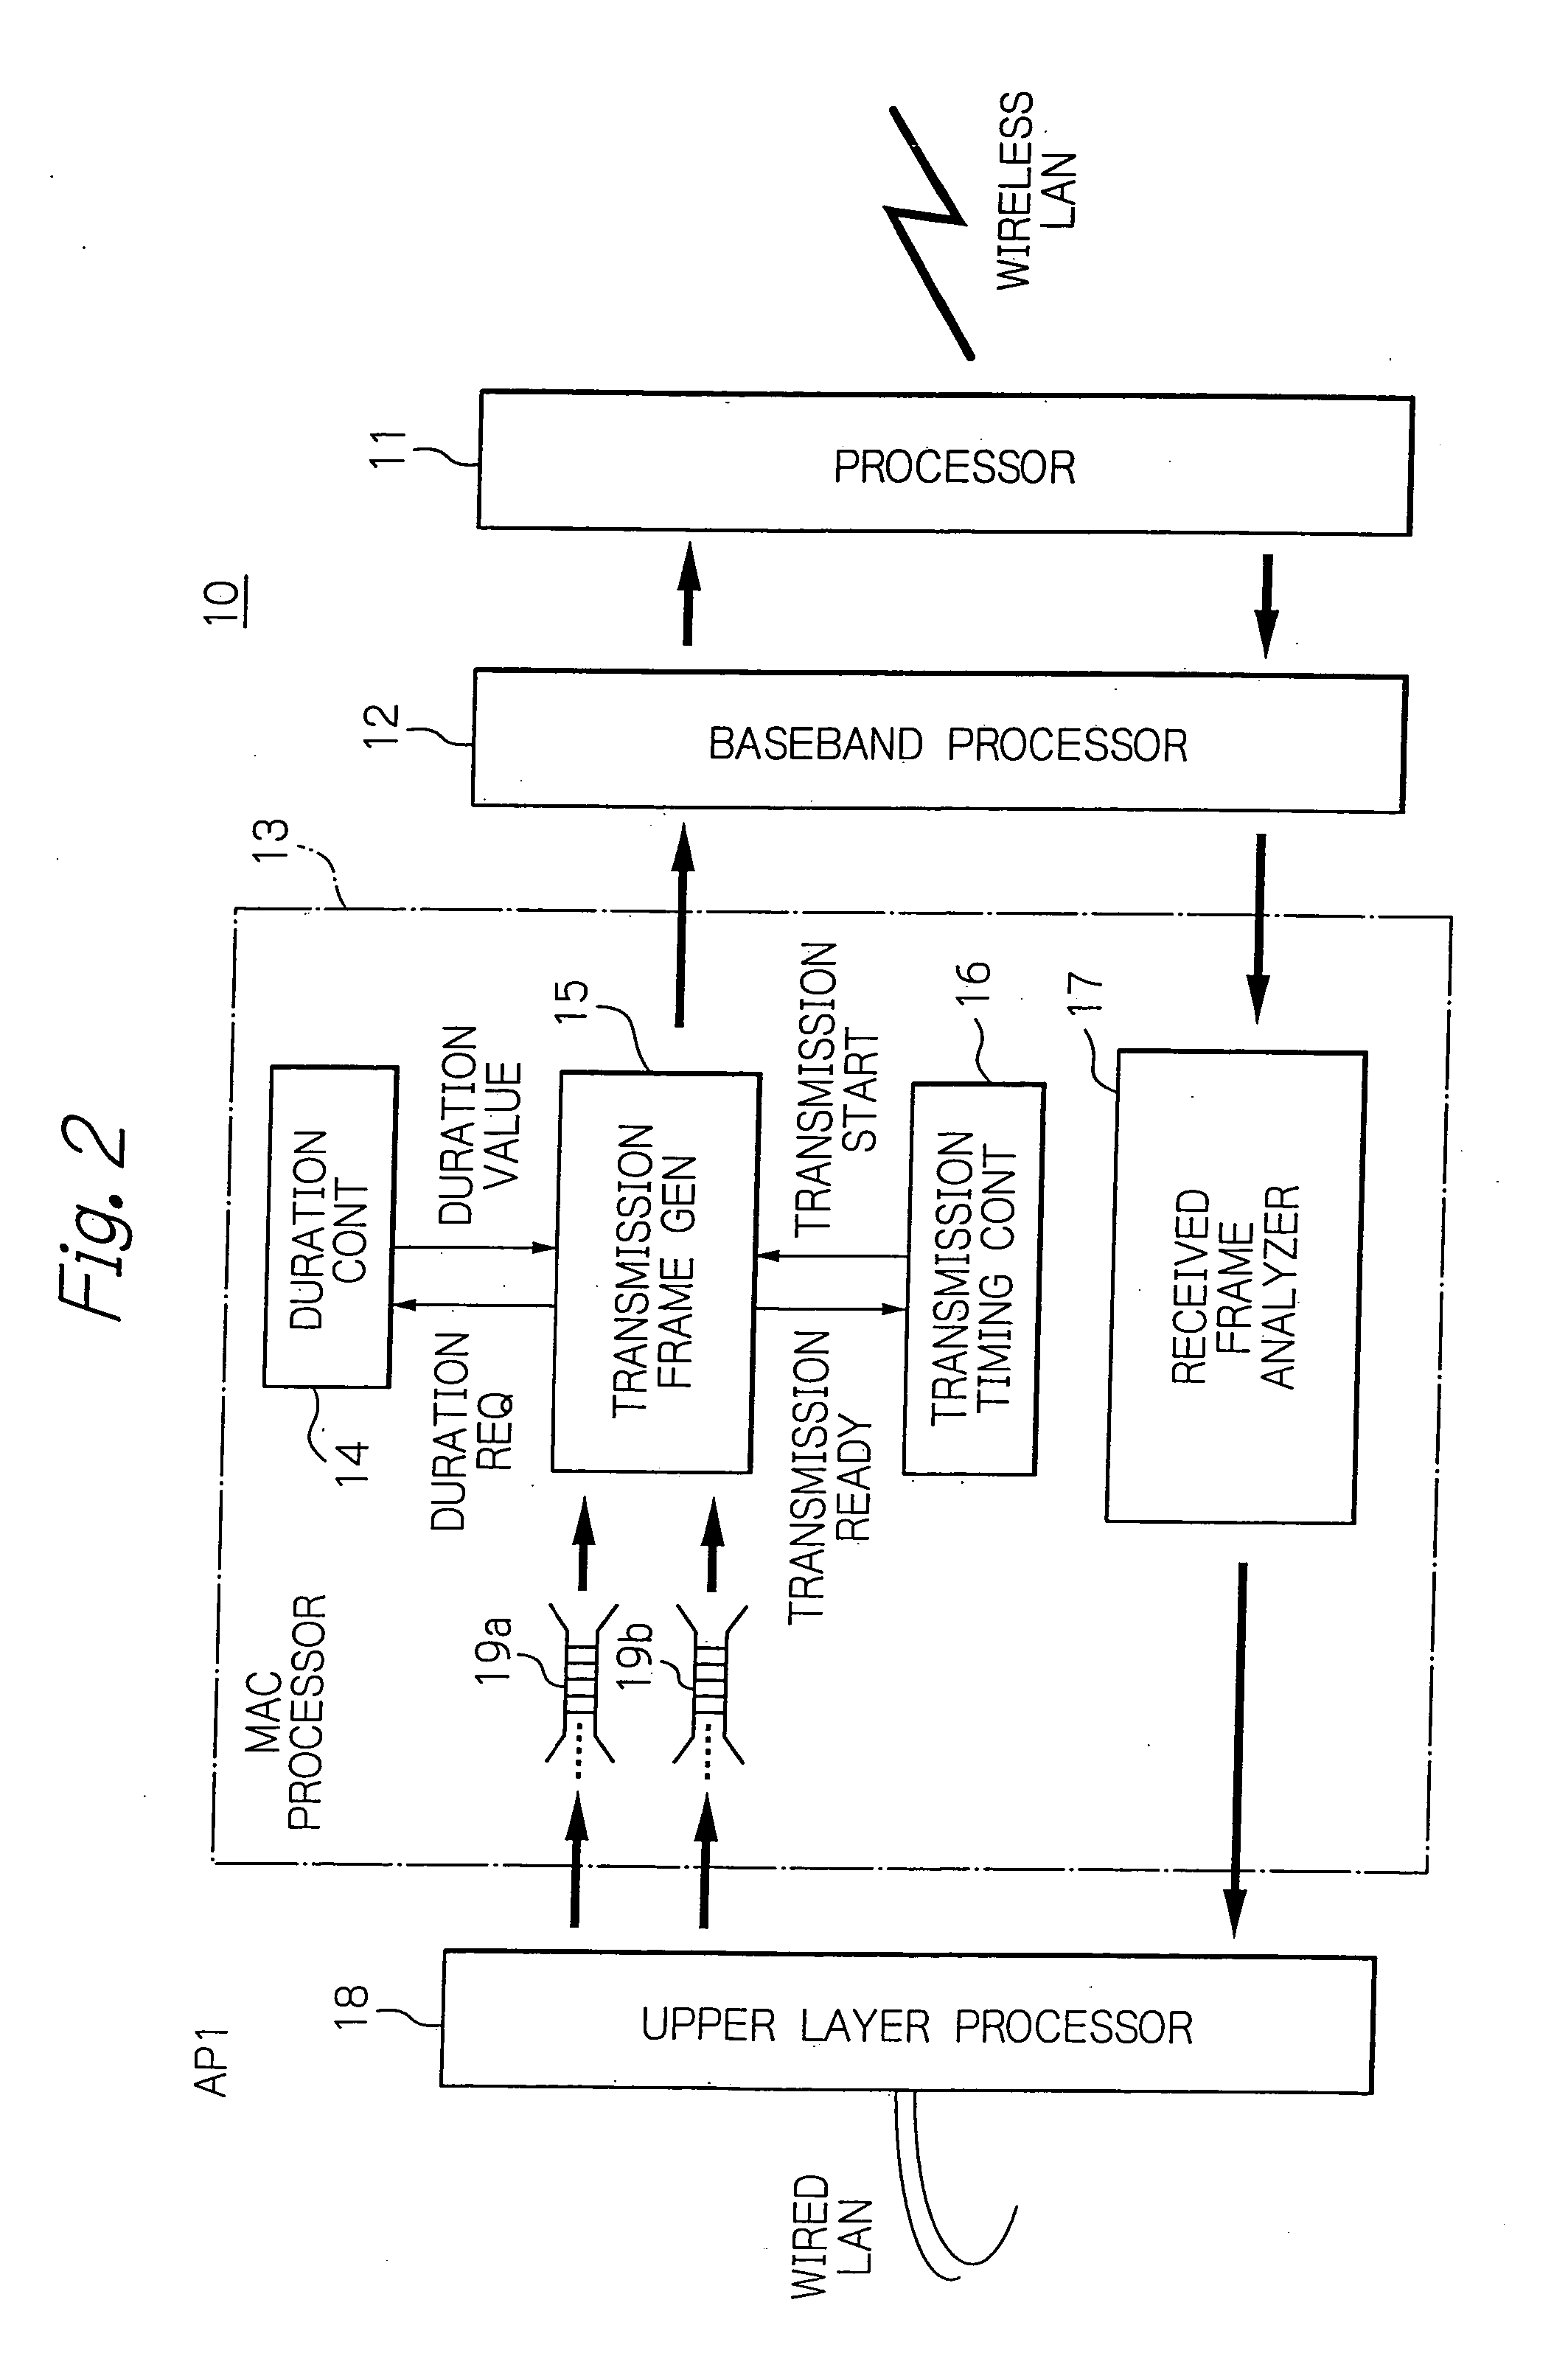 Method of controlling quality of service for a wireless LAN base station apparatus